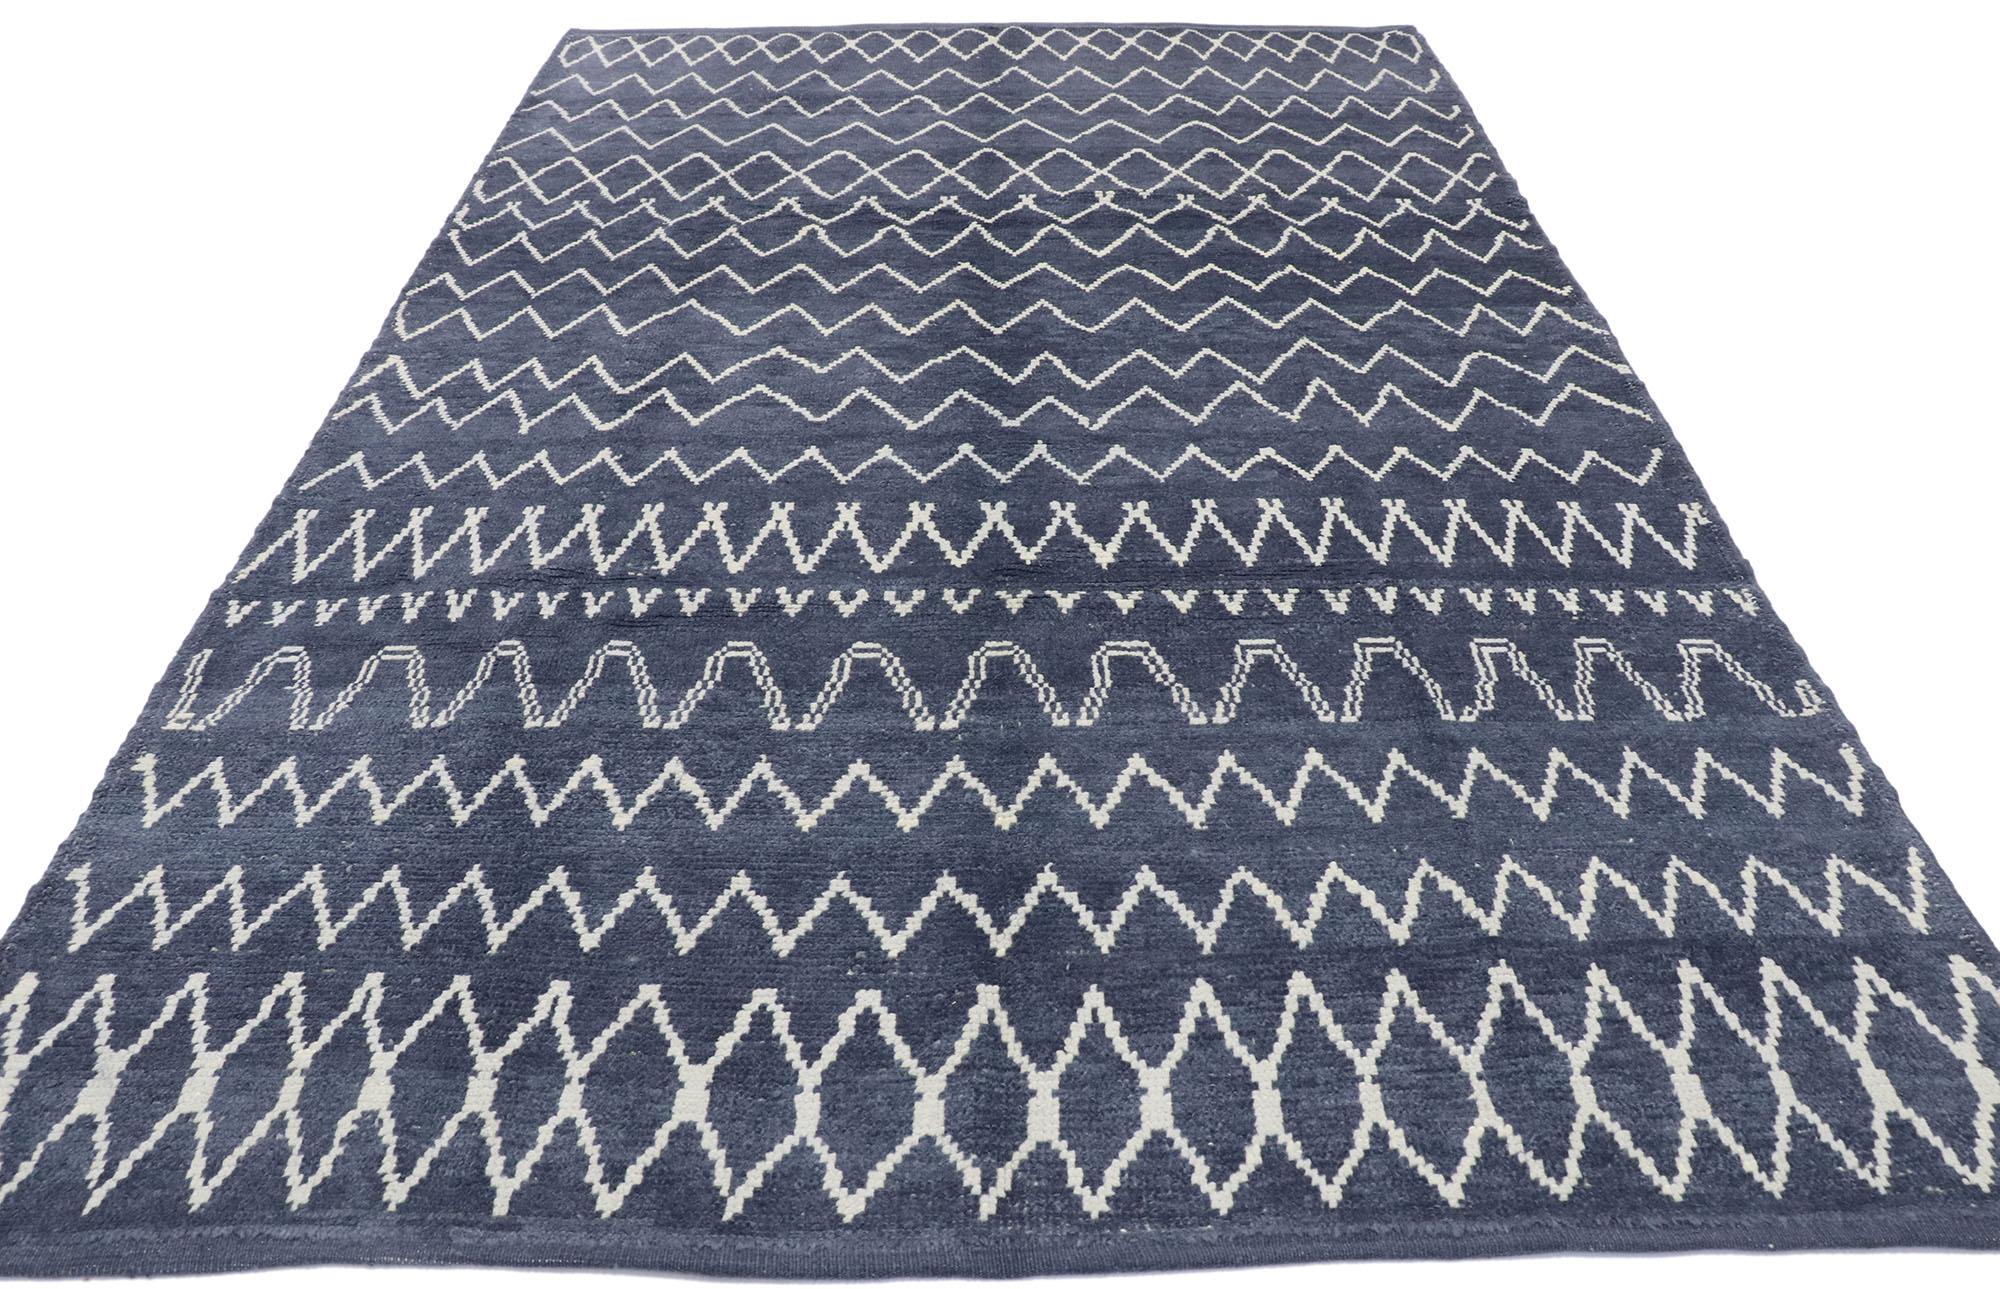 Tribal New Contemporary Moroccan Style Rug with Diamond Pattern and Chevron Design For Sale